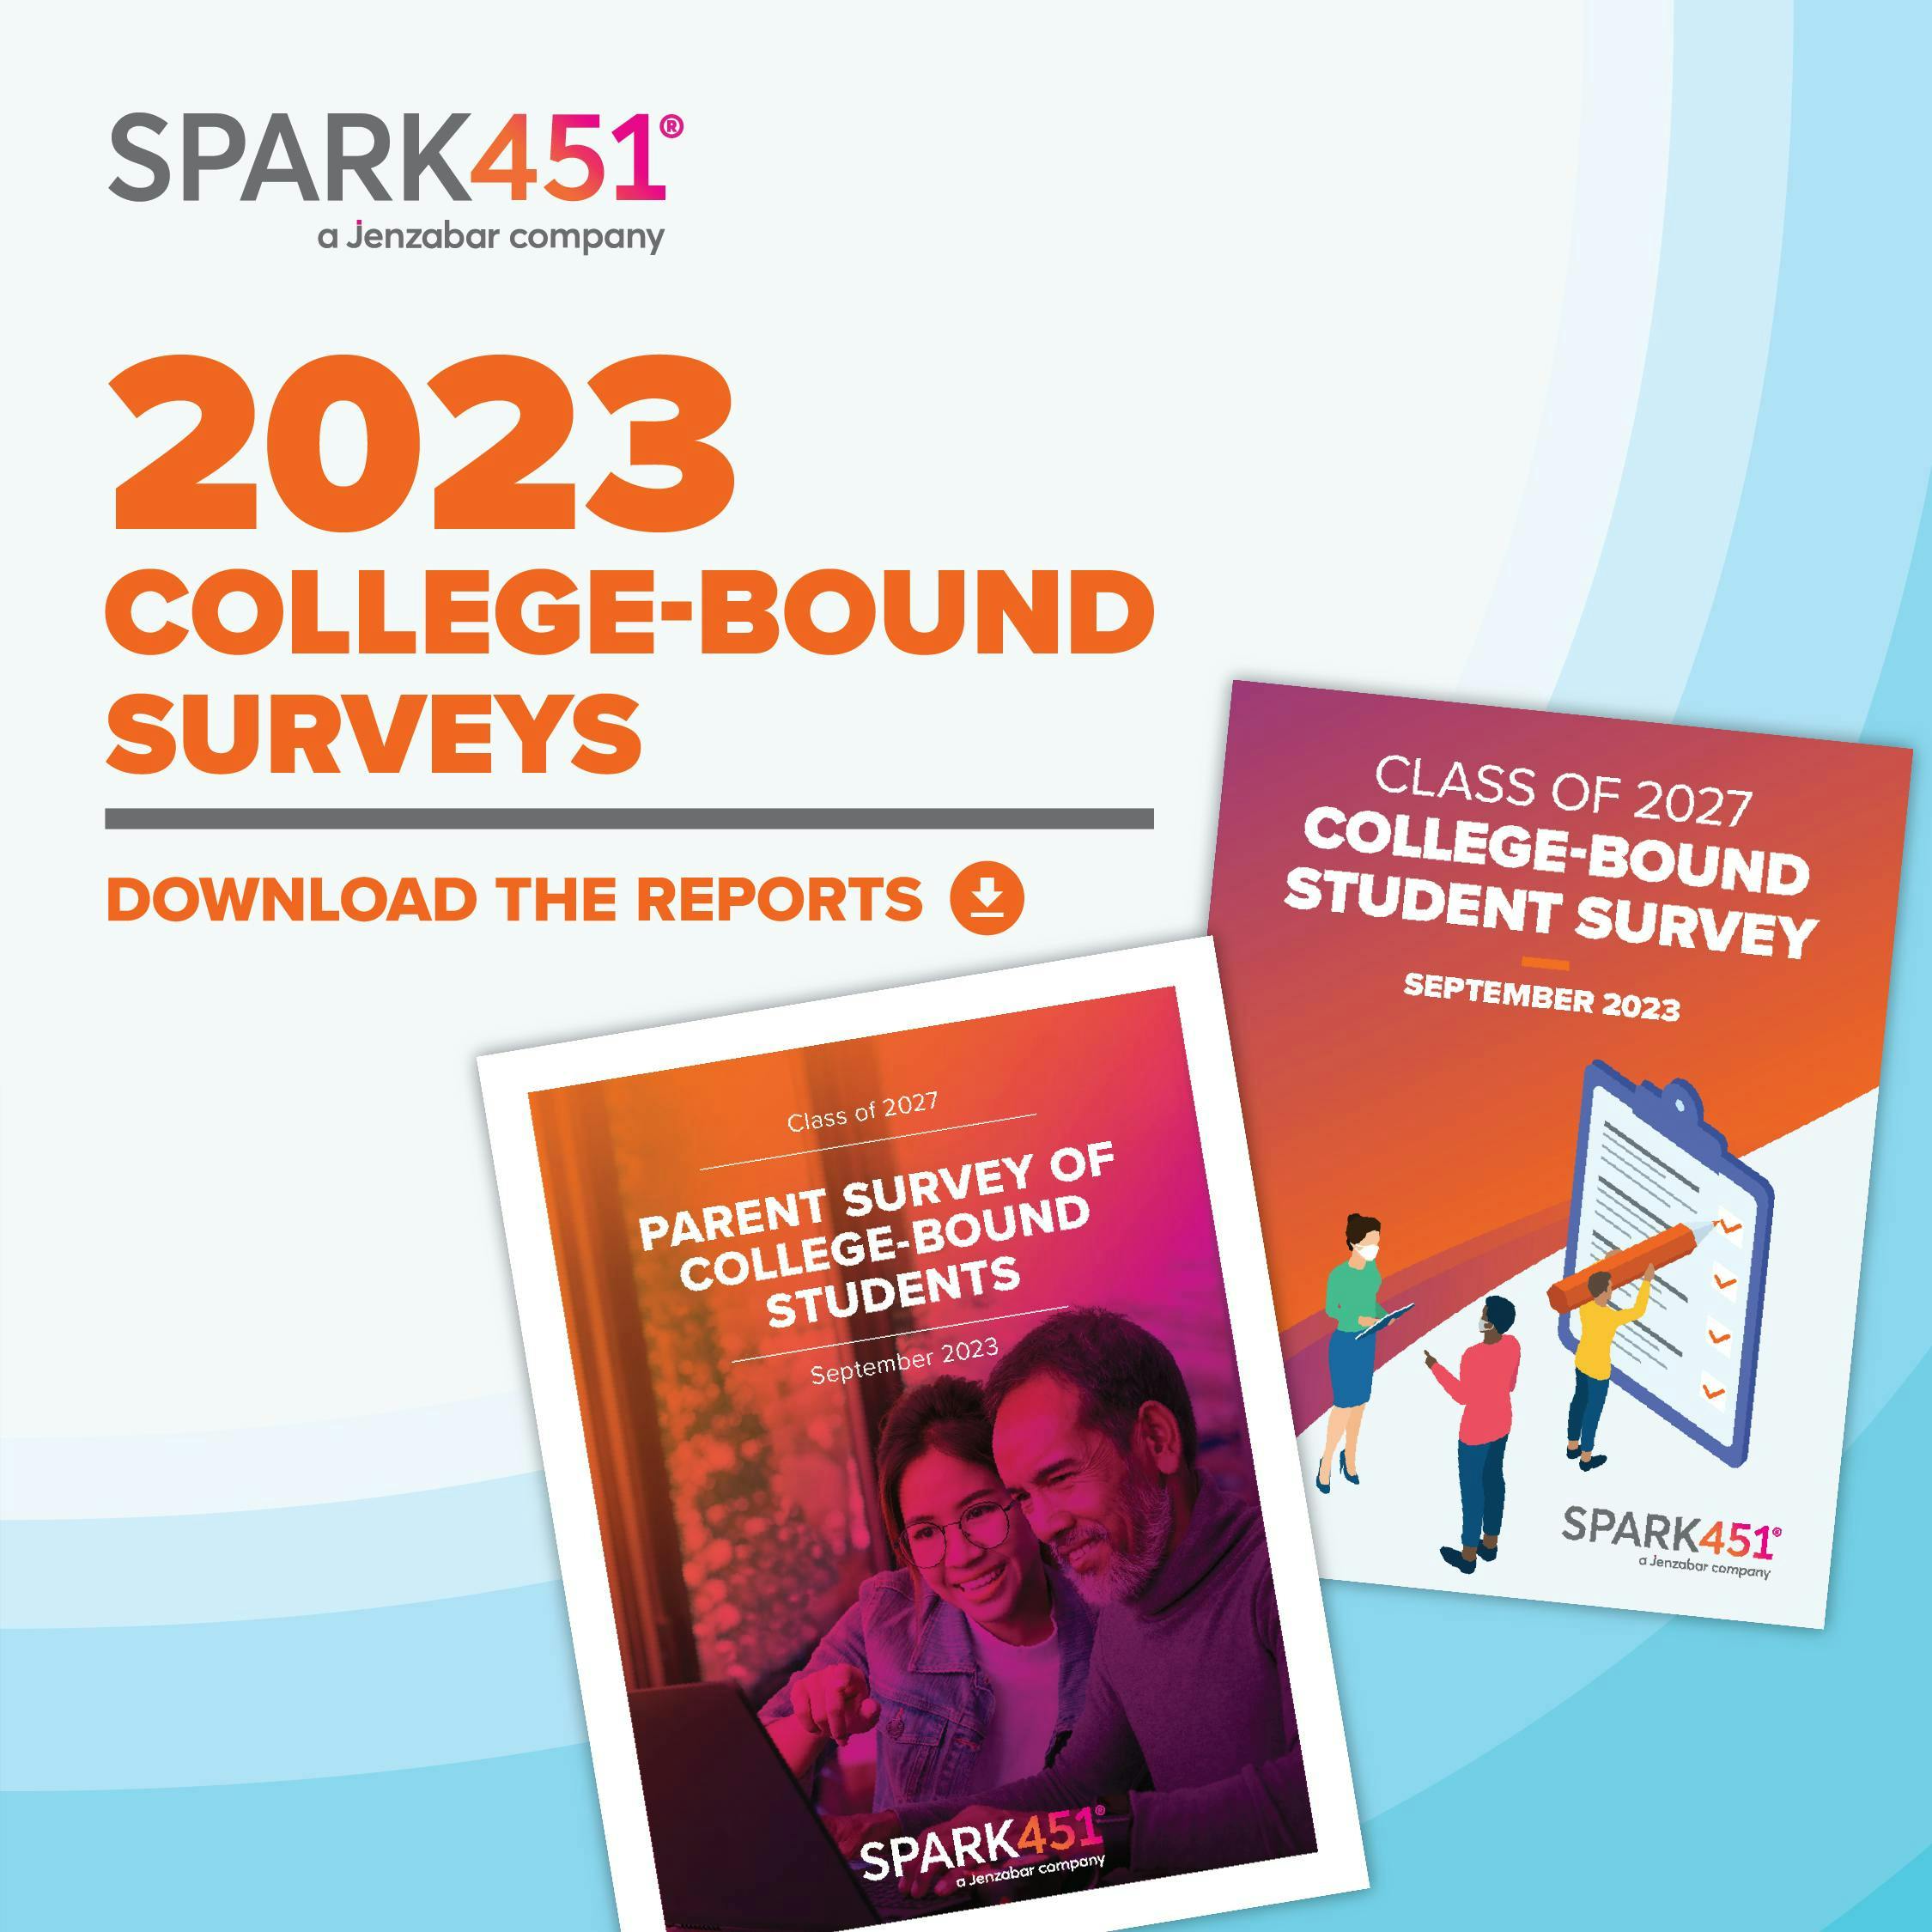 Survey Report: Spark451’s Latest College-Bound Student and Parent Survey Results